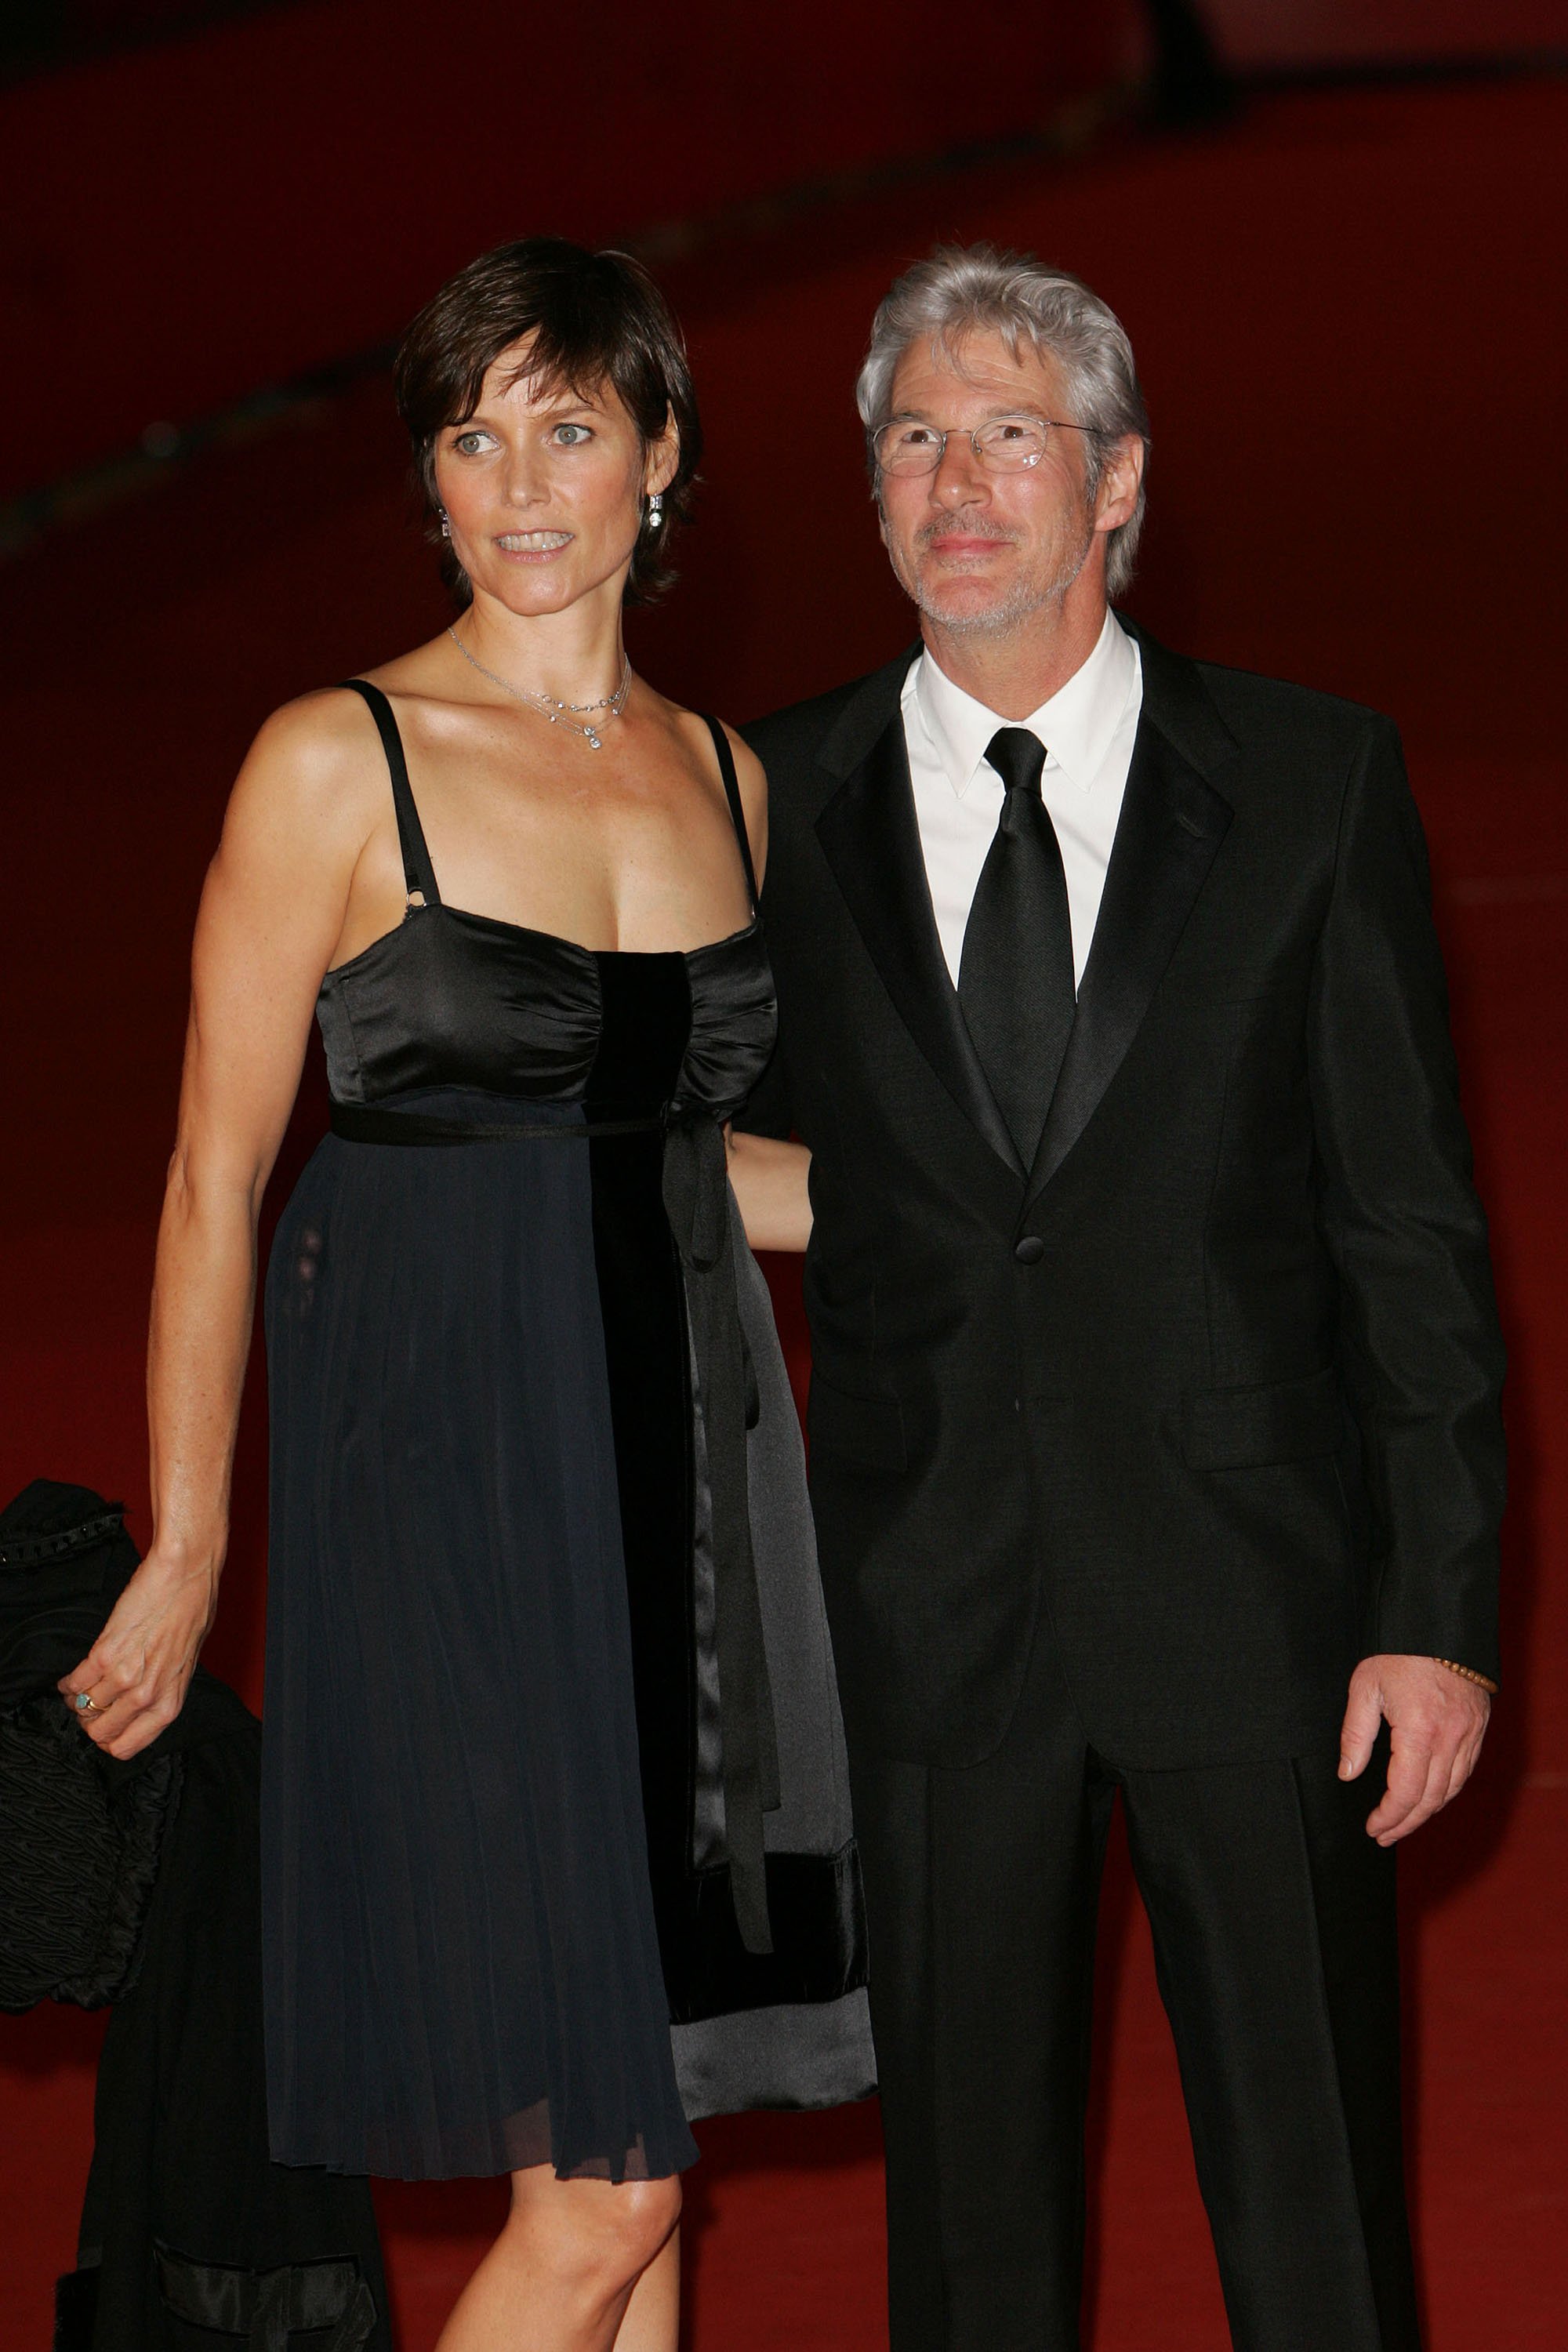 Richard Gere and Carey Lowell in Italy 2006. | Source: Getty Images